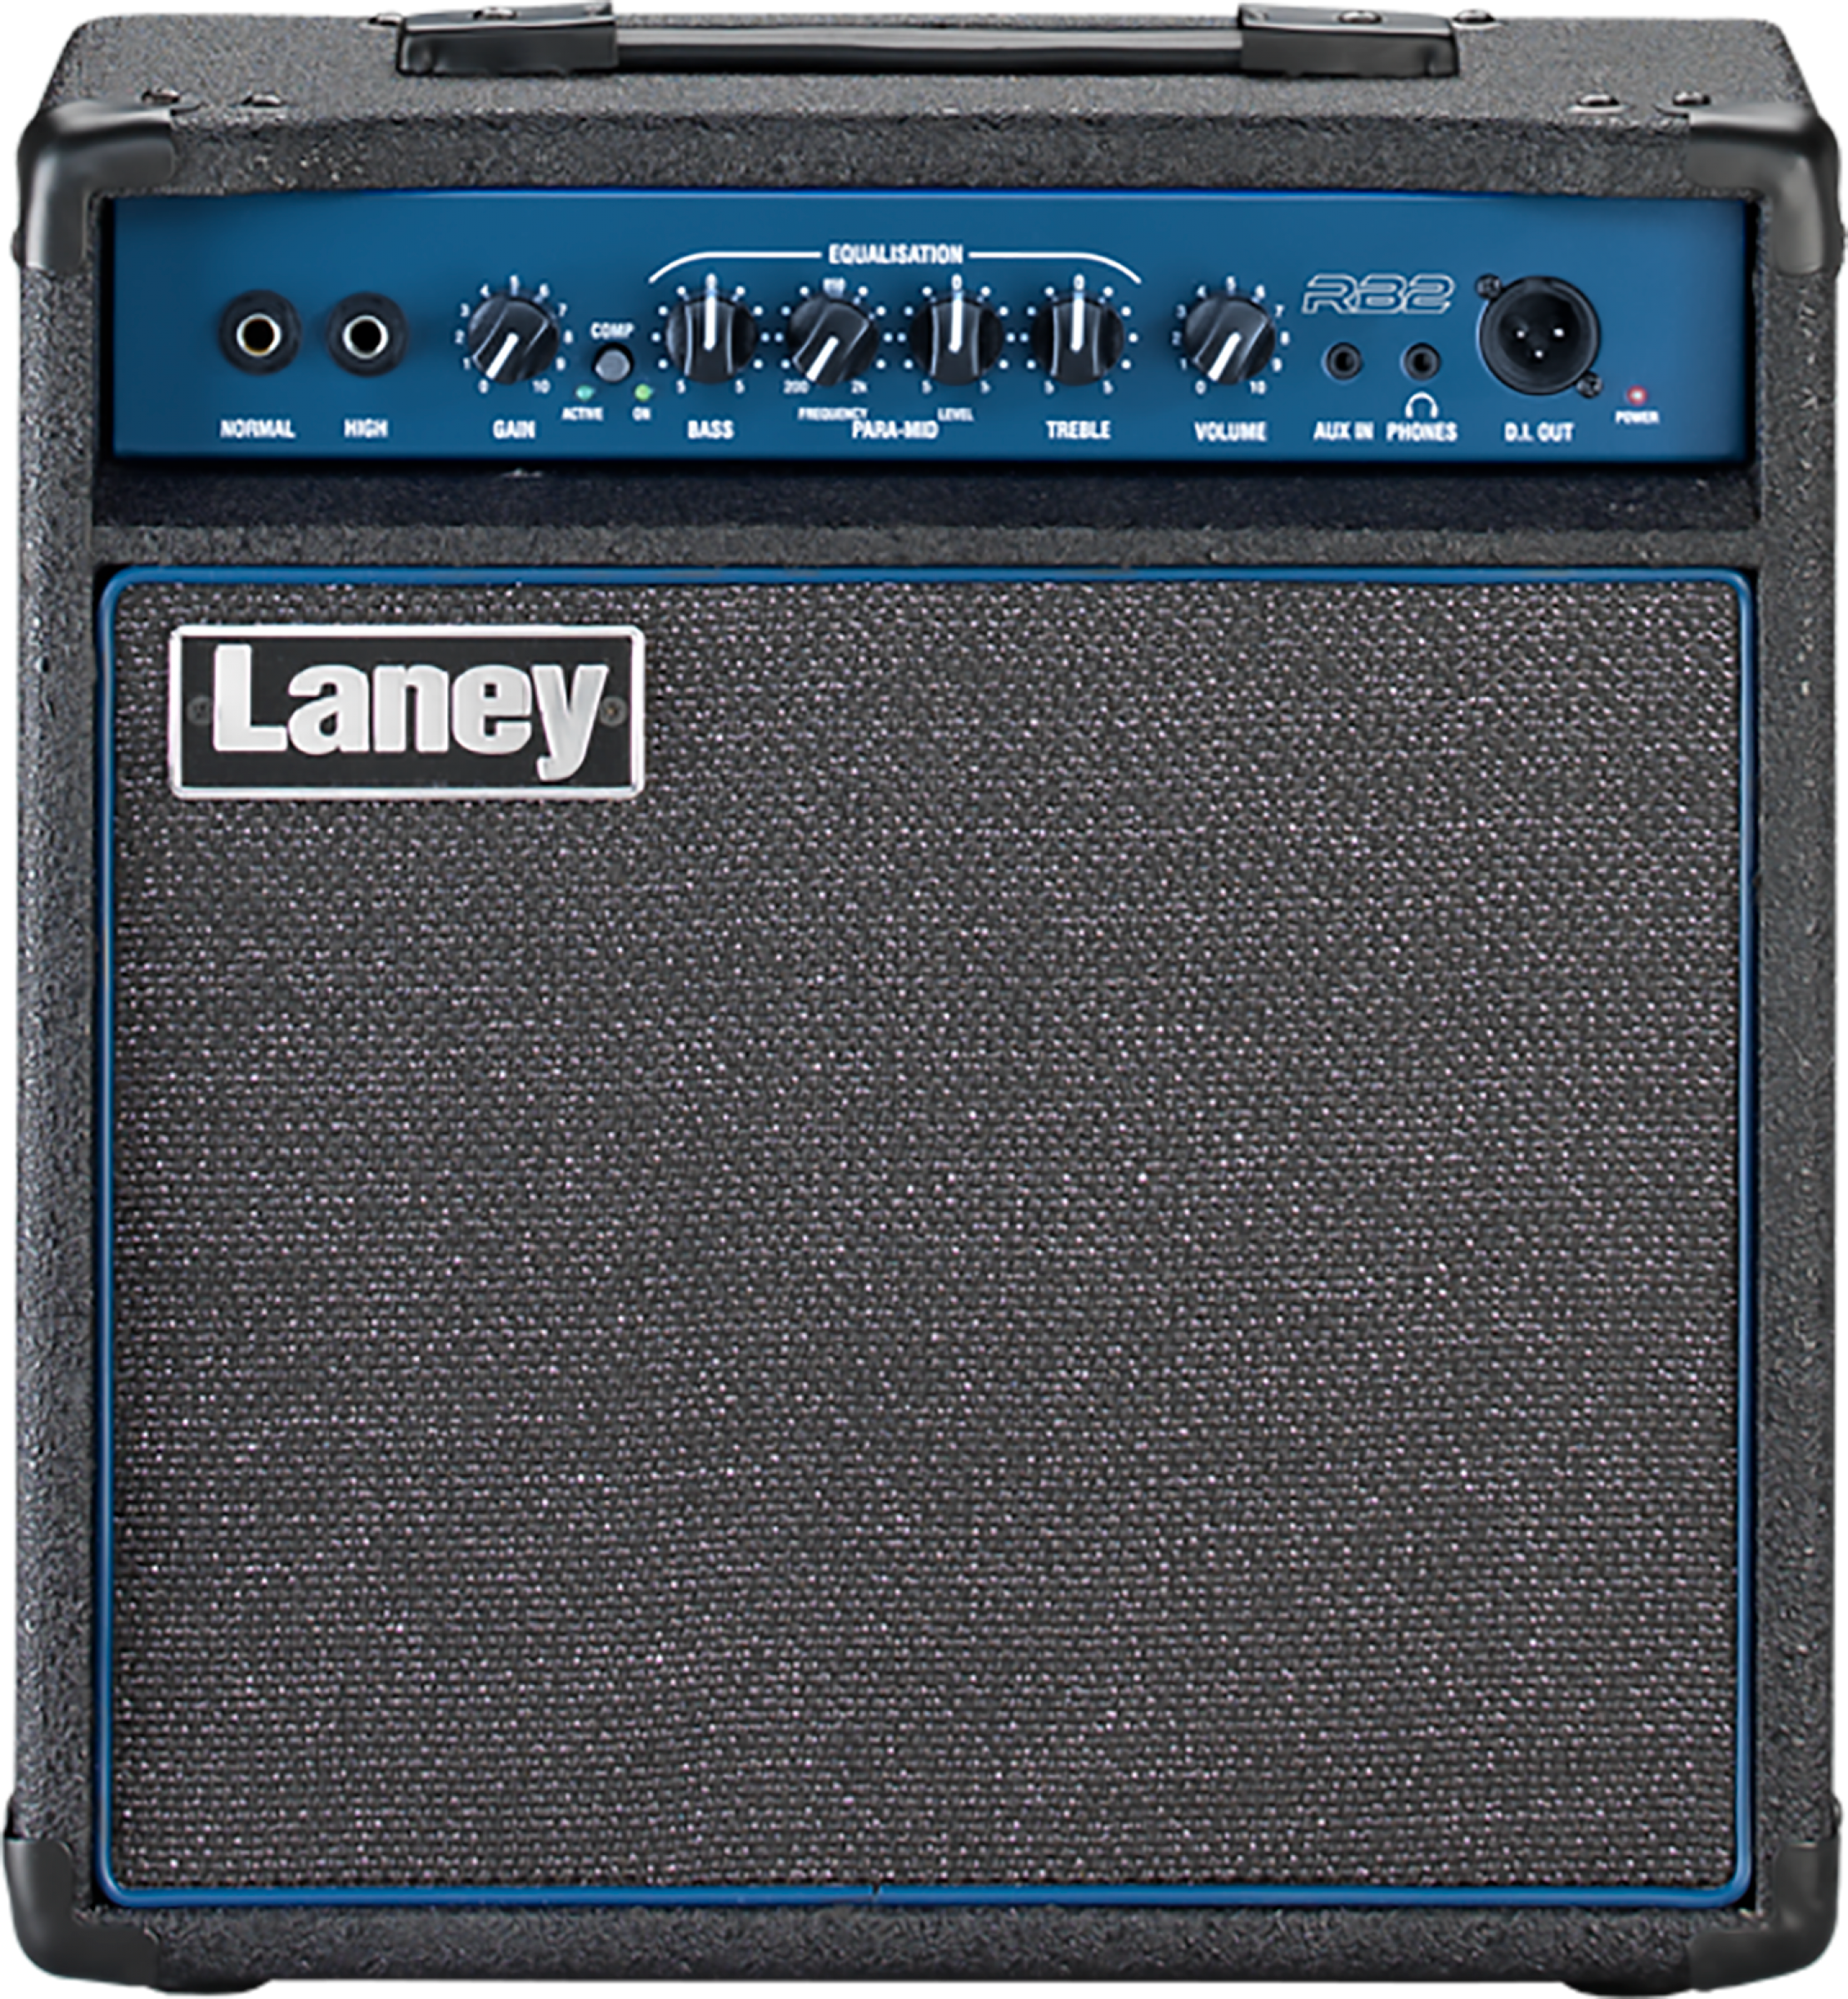 Laney Rb2 30w 1x10 - Combo Ampli Basse - Main picture